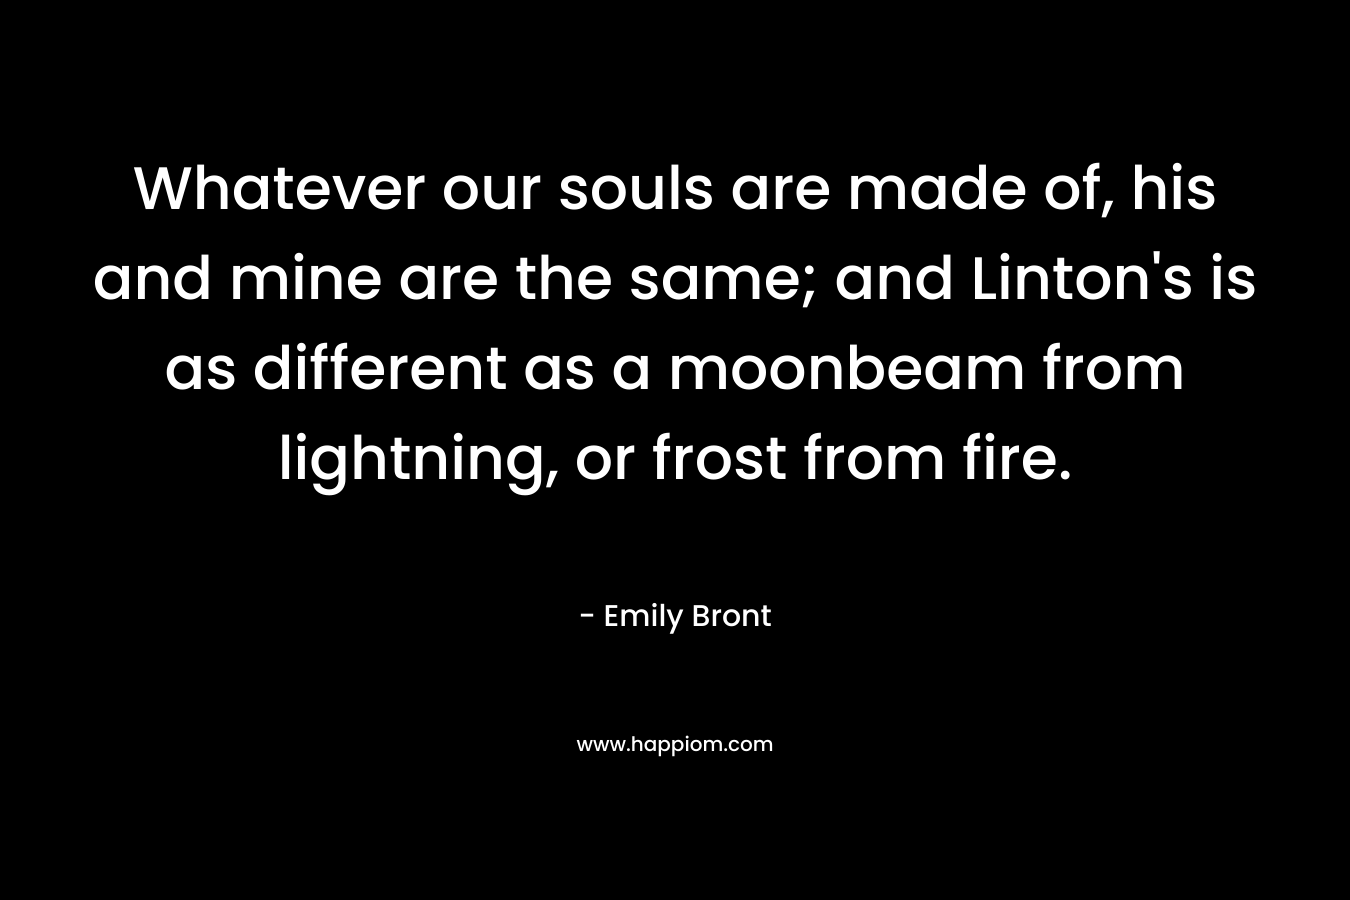 Whatever our souls are made of, his and mine are the same; and Linton's is as different as a moonbeam from lightning, or frost from fire.